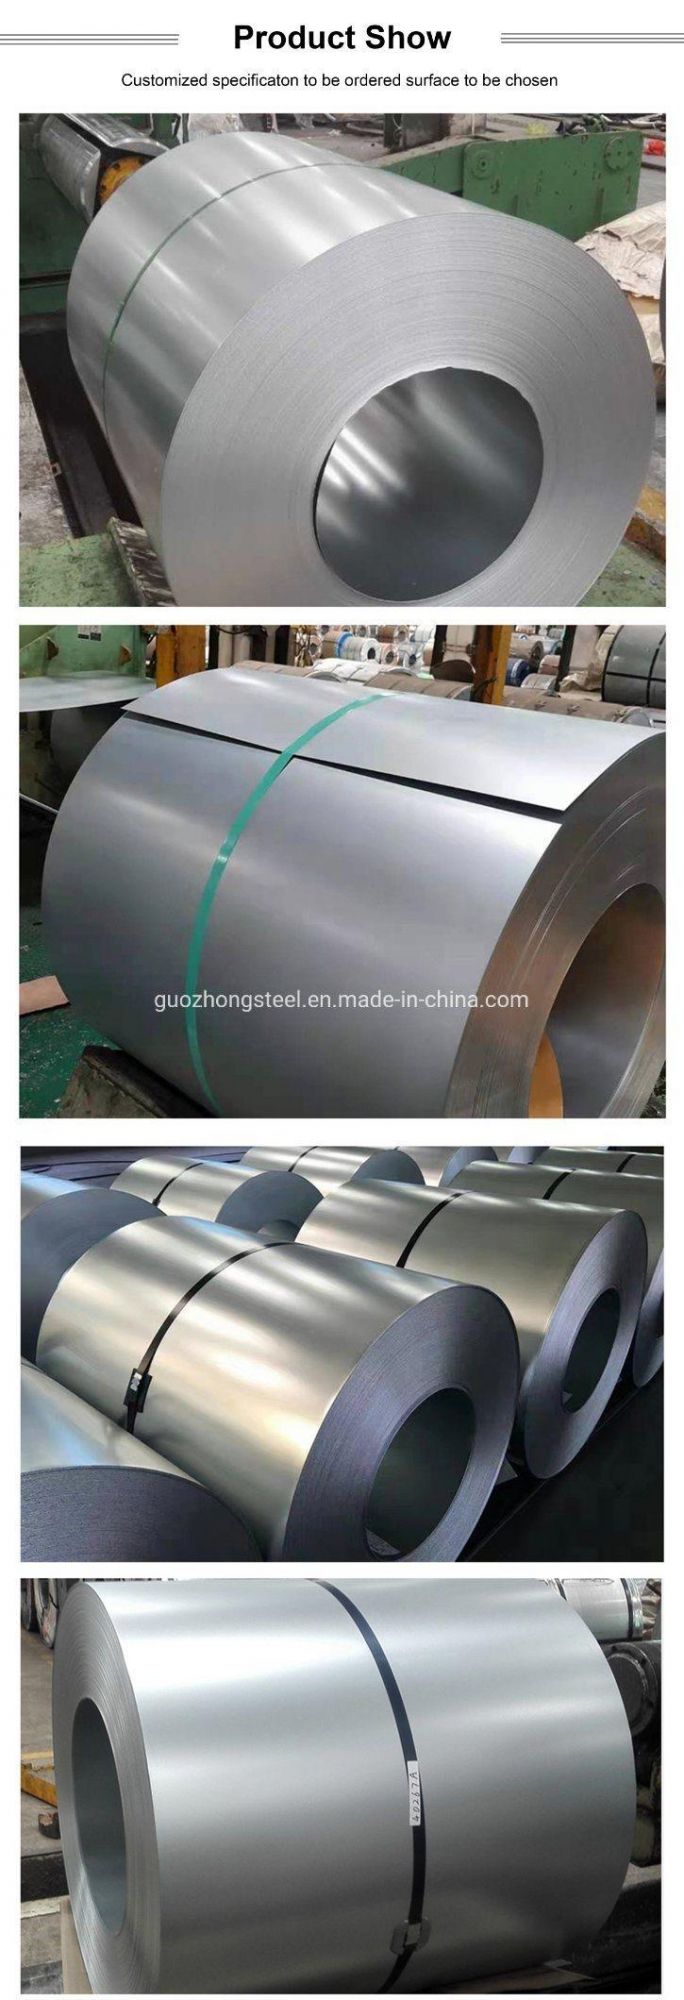 Guozhong S350gd S450gd Z Galvanized Secondary Quality Cr Steel Coil